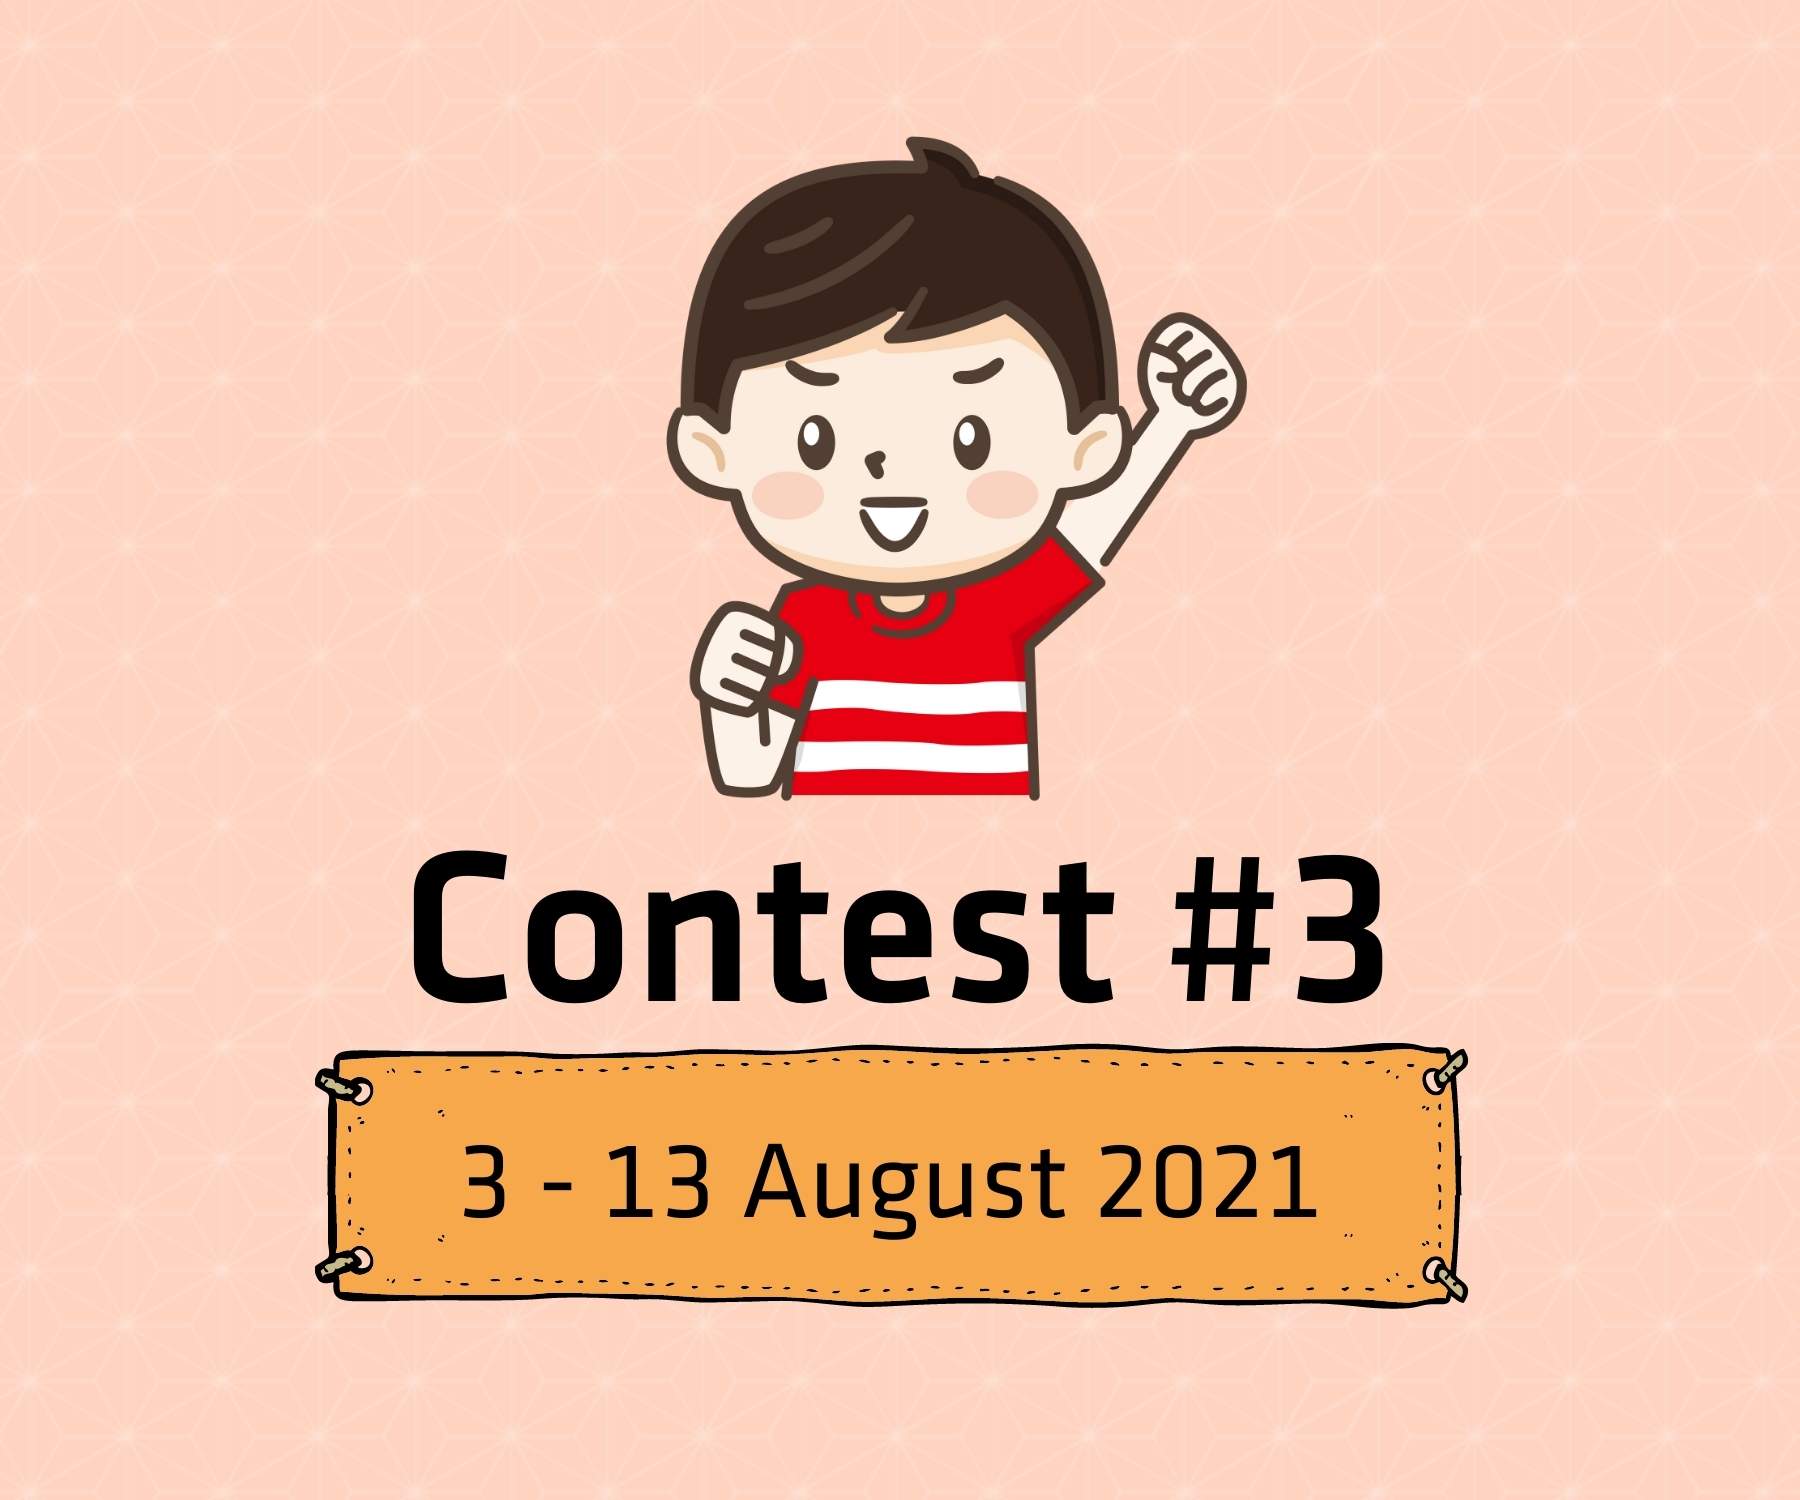 Contest #3 - 3 to 13 August 2021